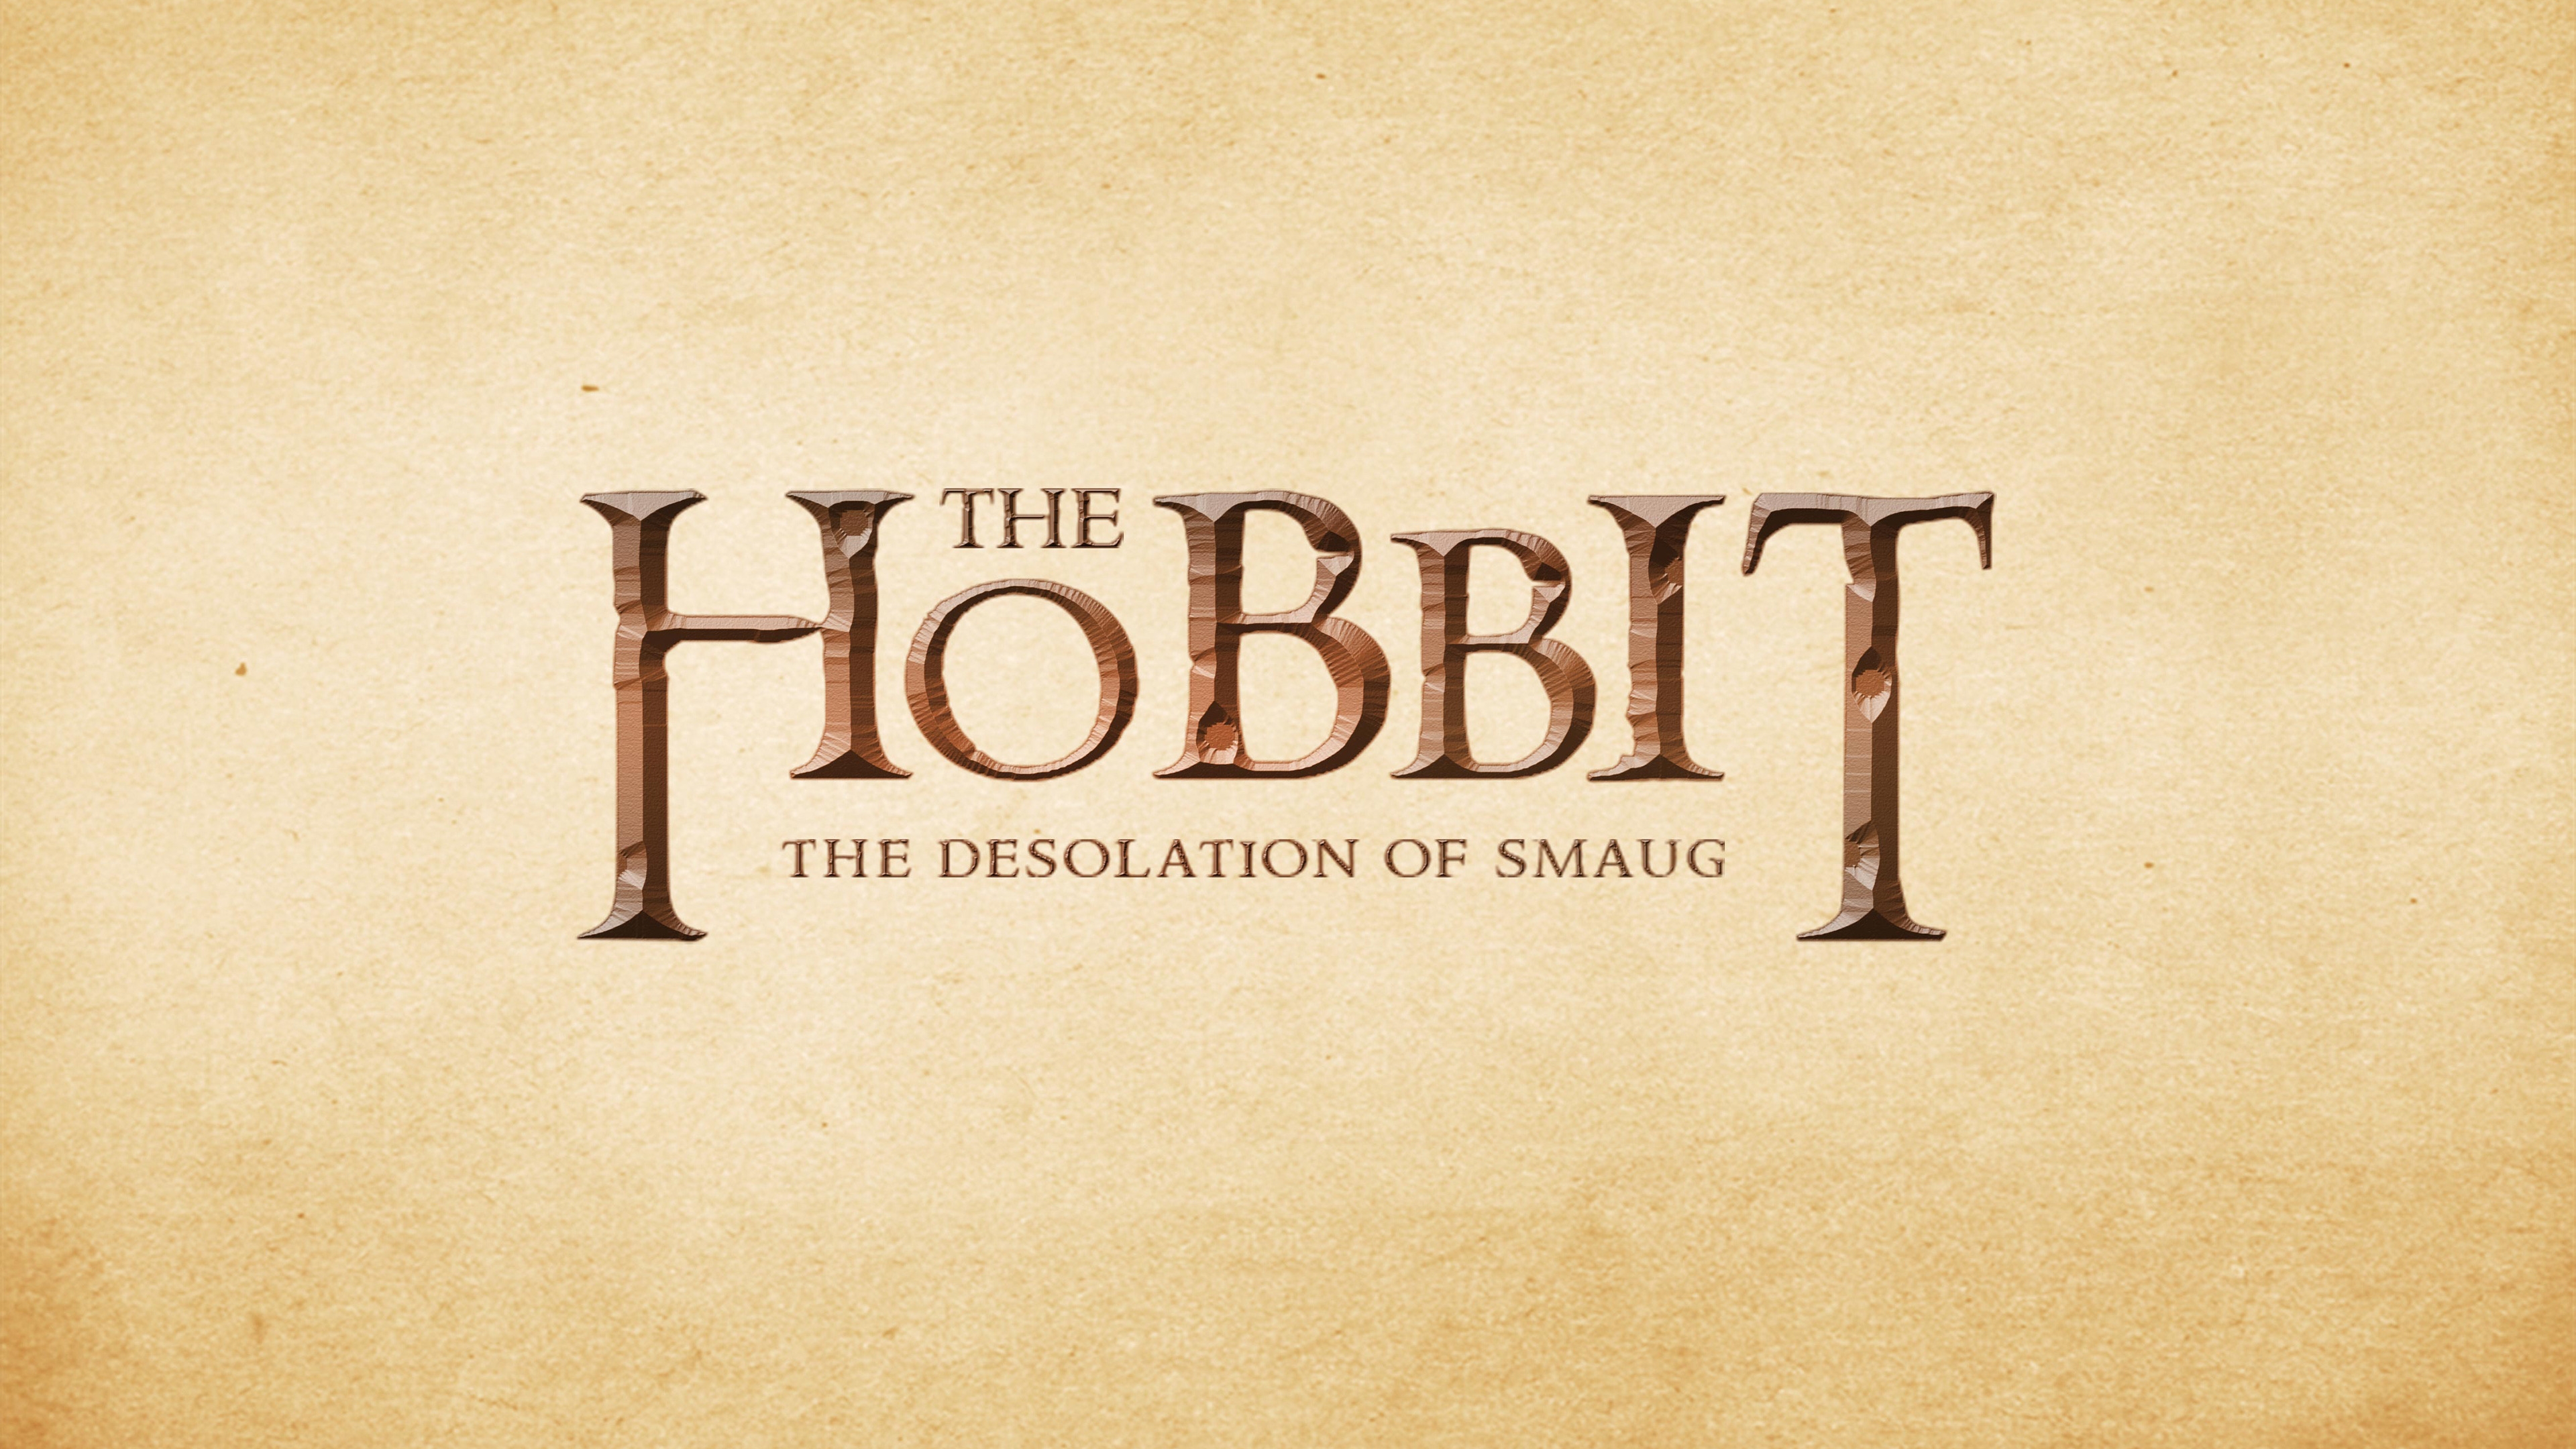 The Hobbit The Desolation of Smaug for 3840 x 2160 Ultra HD resolution